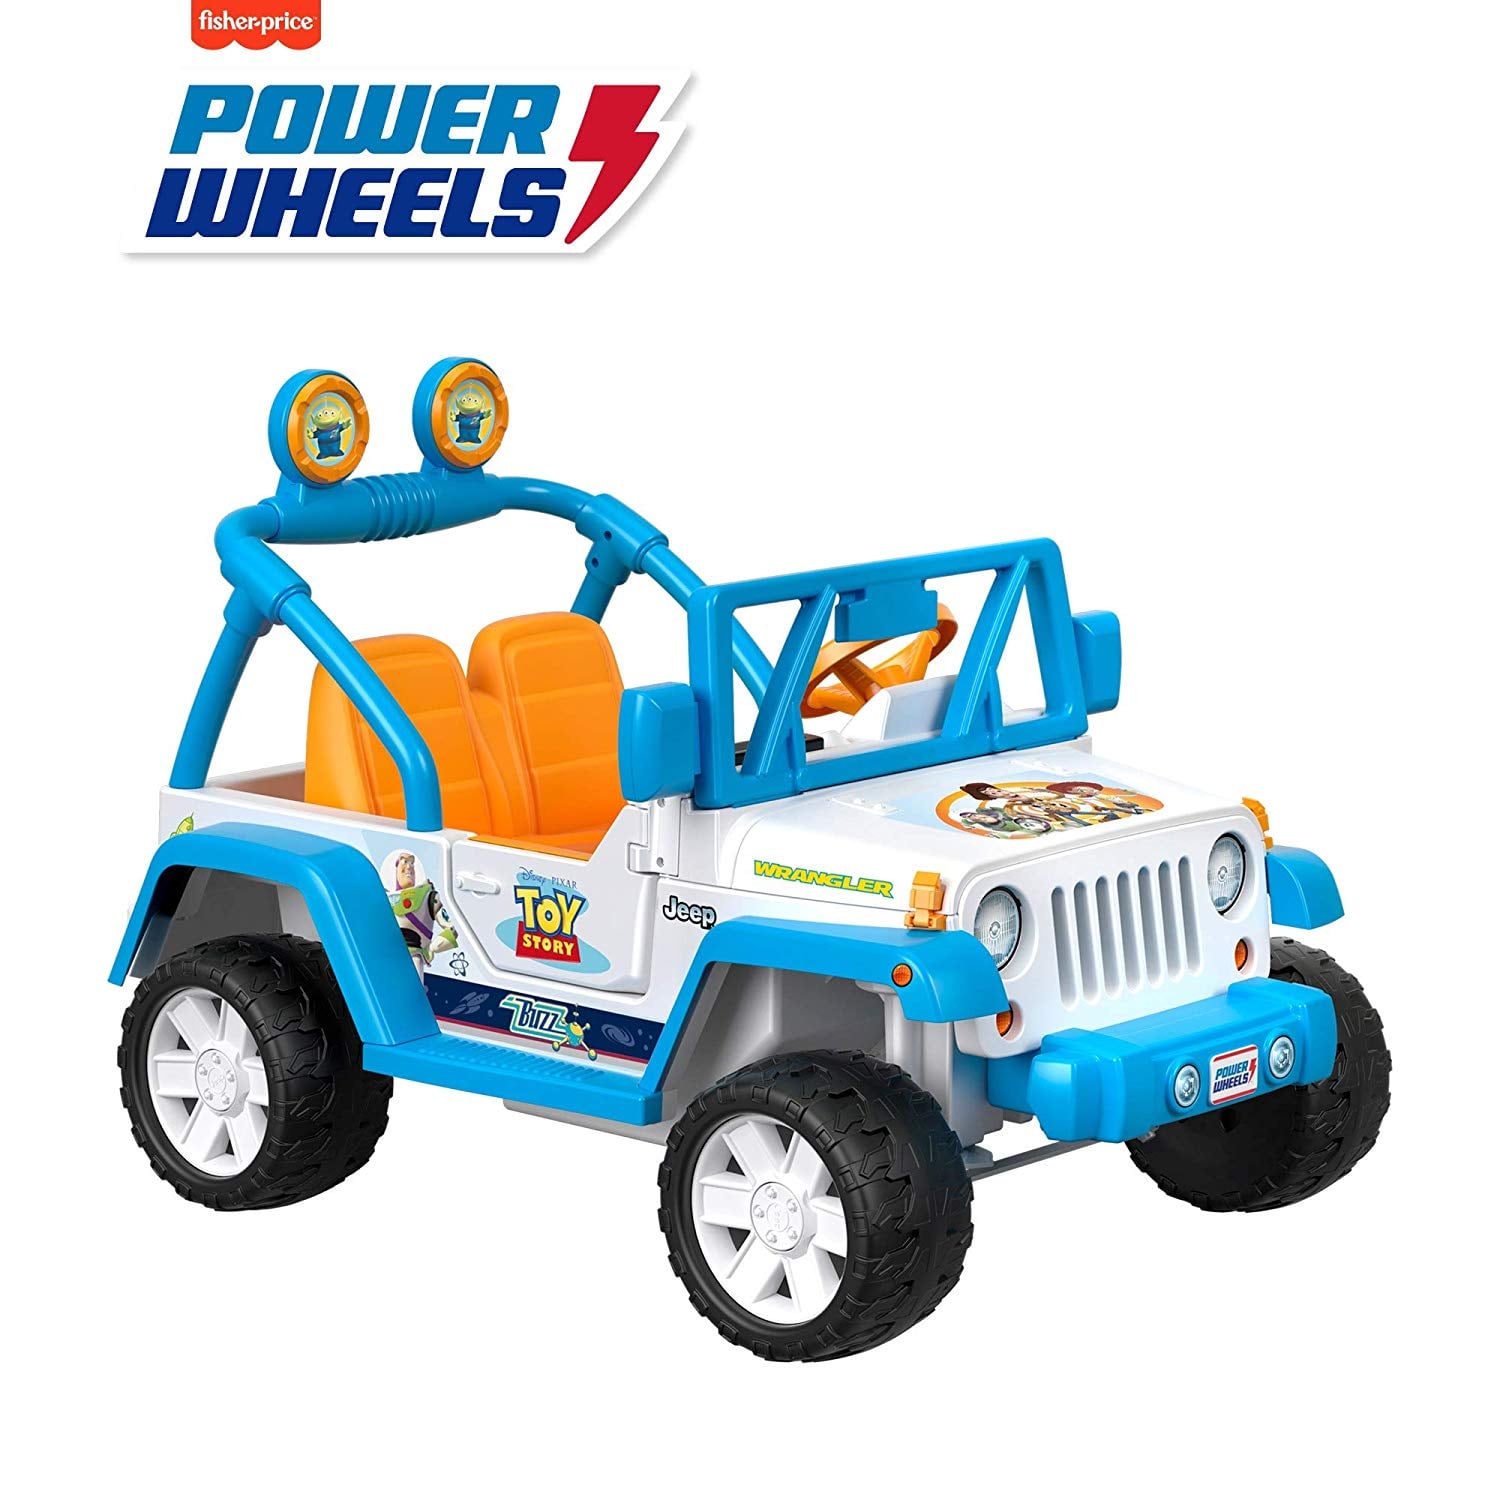 power wheels for a 3 year old